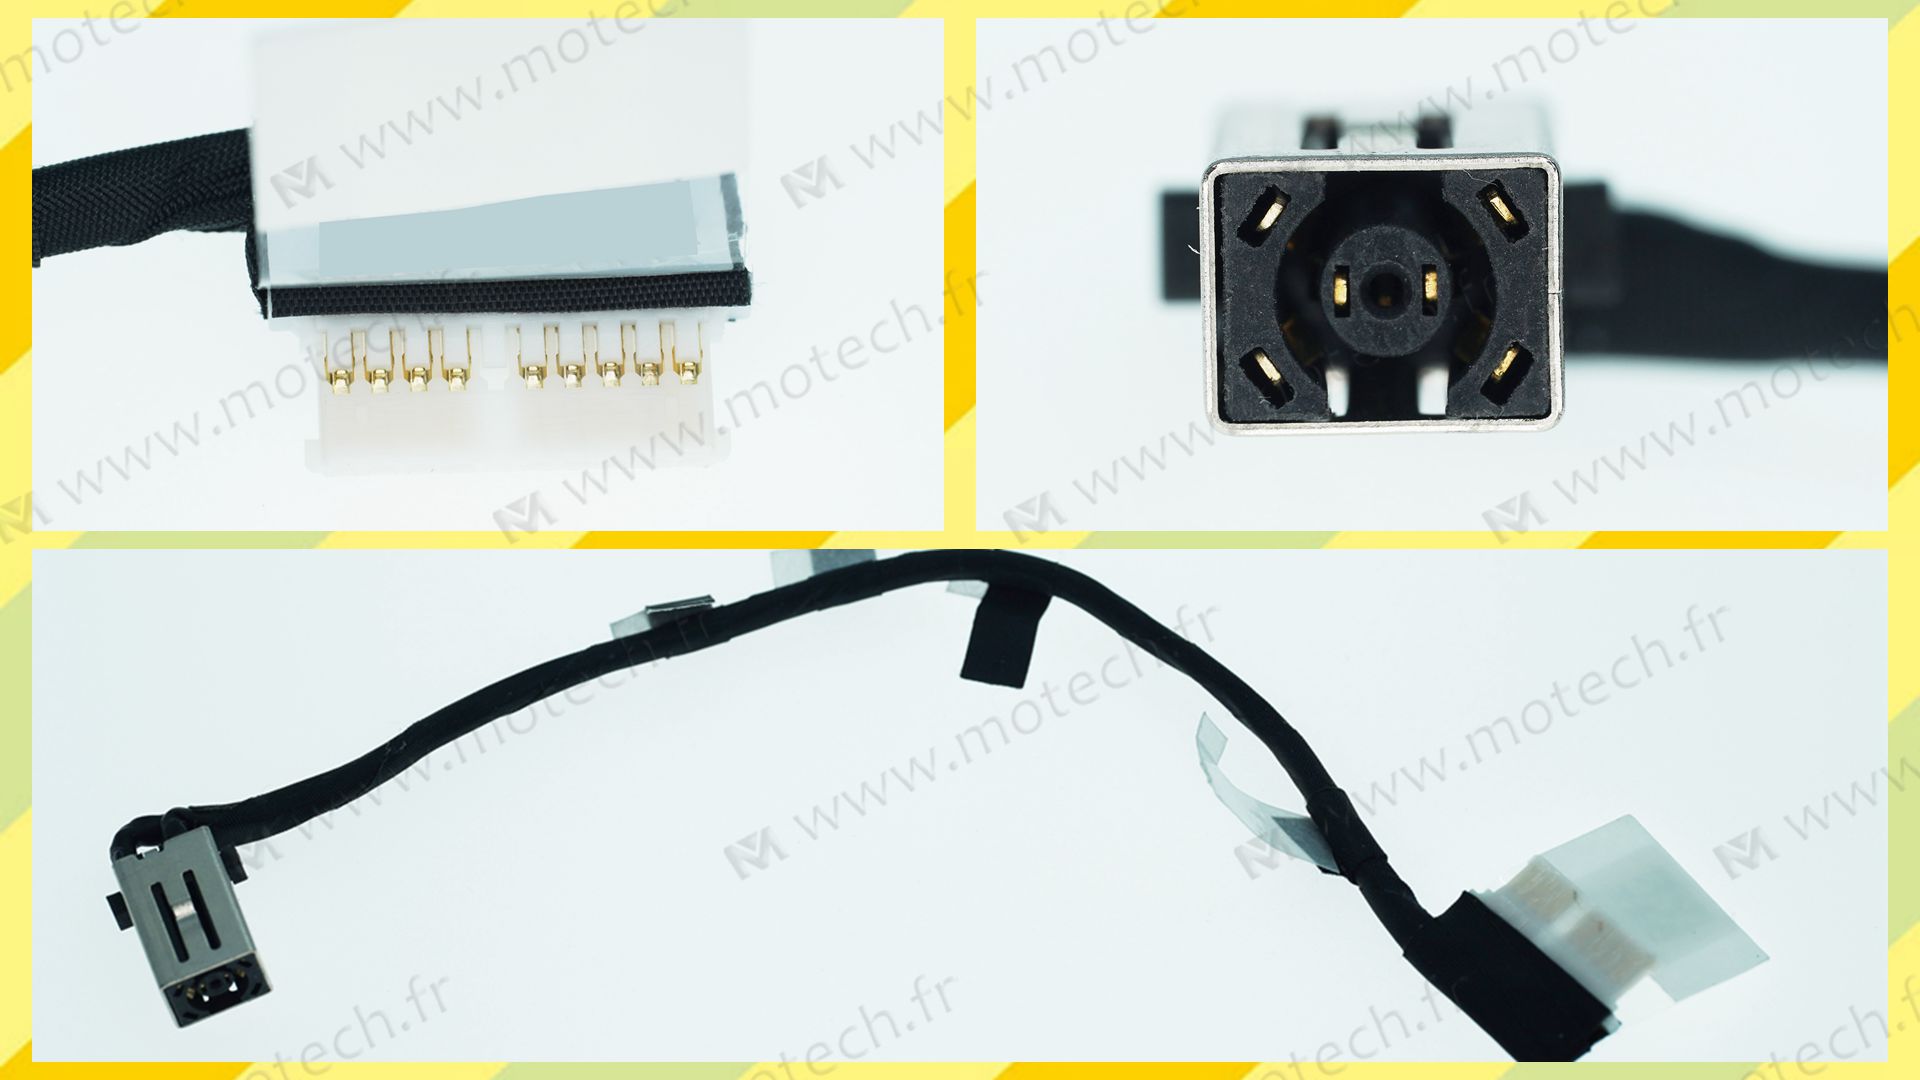 Dell 7610 inspiron DC Jack, DC IN Câble Dell 7610 inspiron, Dell 7610 inspiron Jack alimentation, Dell 7610 inspiron Power Jack, Dell 7610 inspiron Prise Connecteur, Dell 7610 inspiron Connecteur alimentation, Dell 7610 inspiron connecteur de charge, 